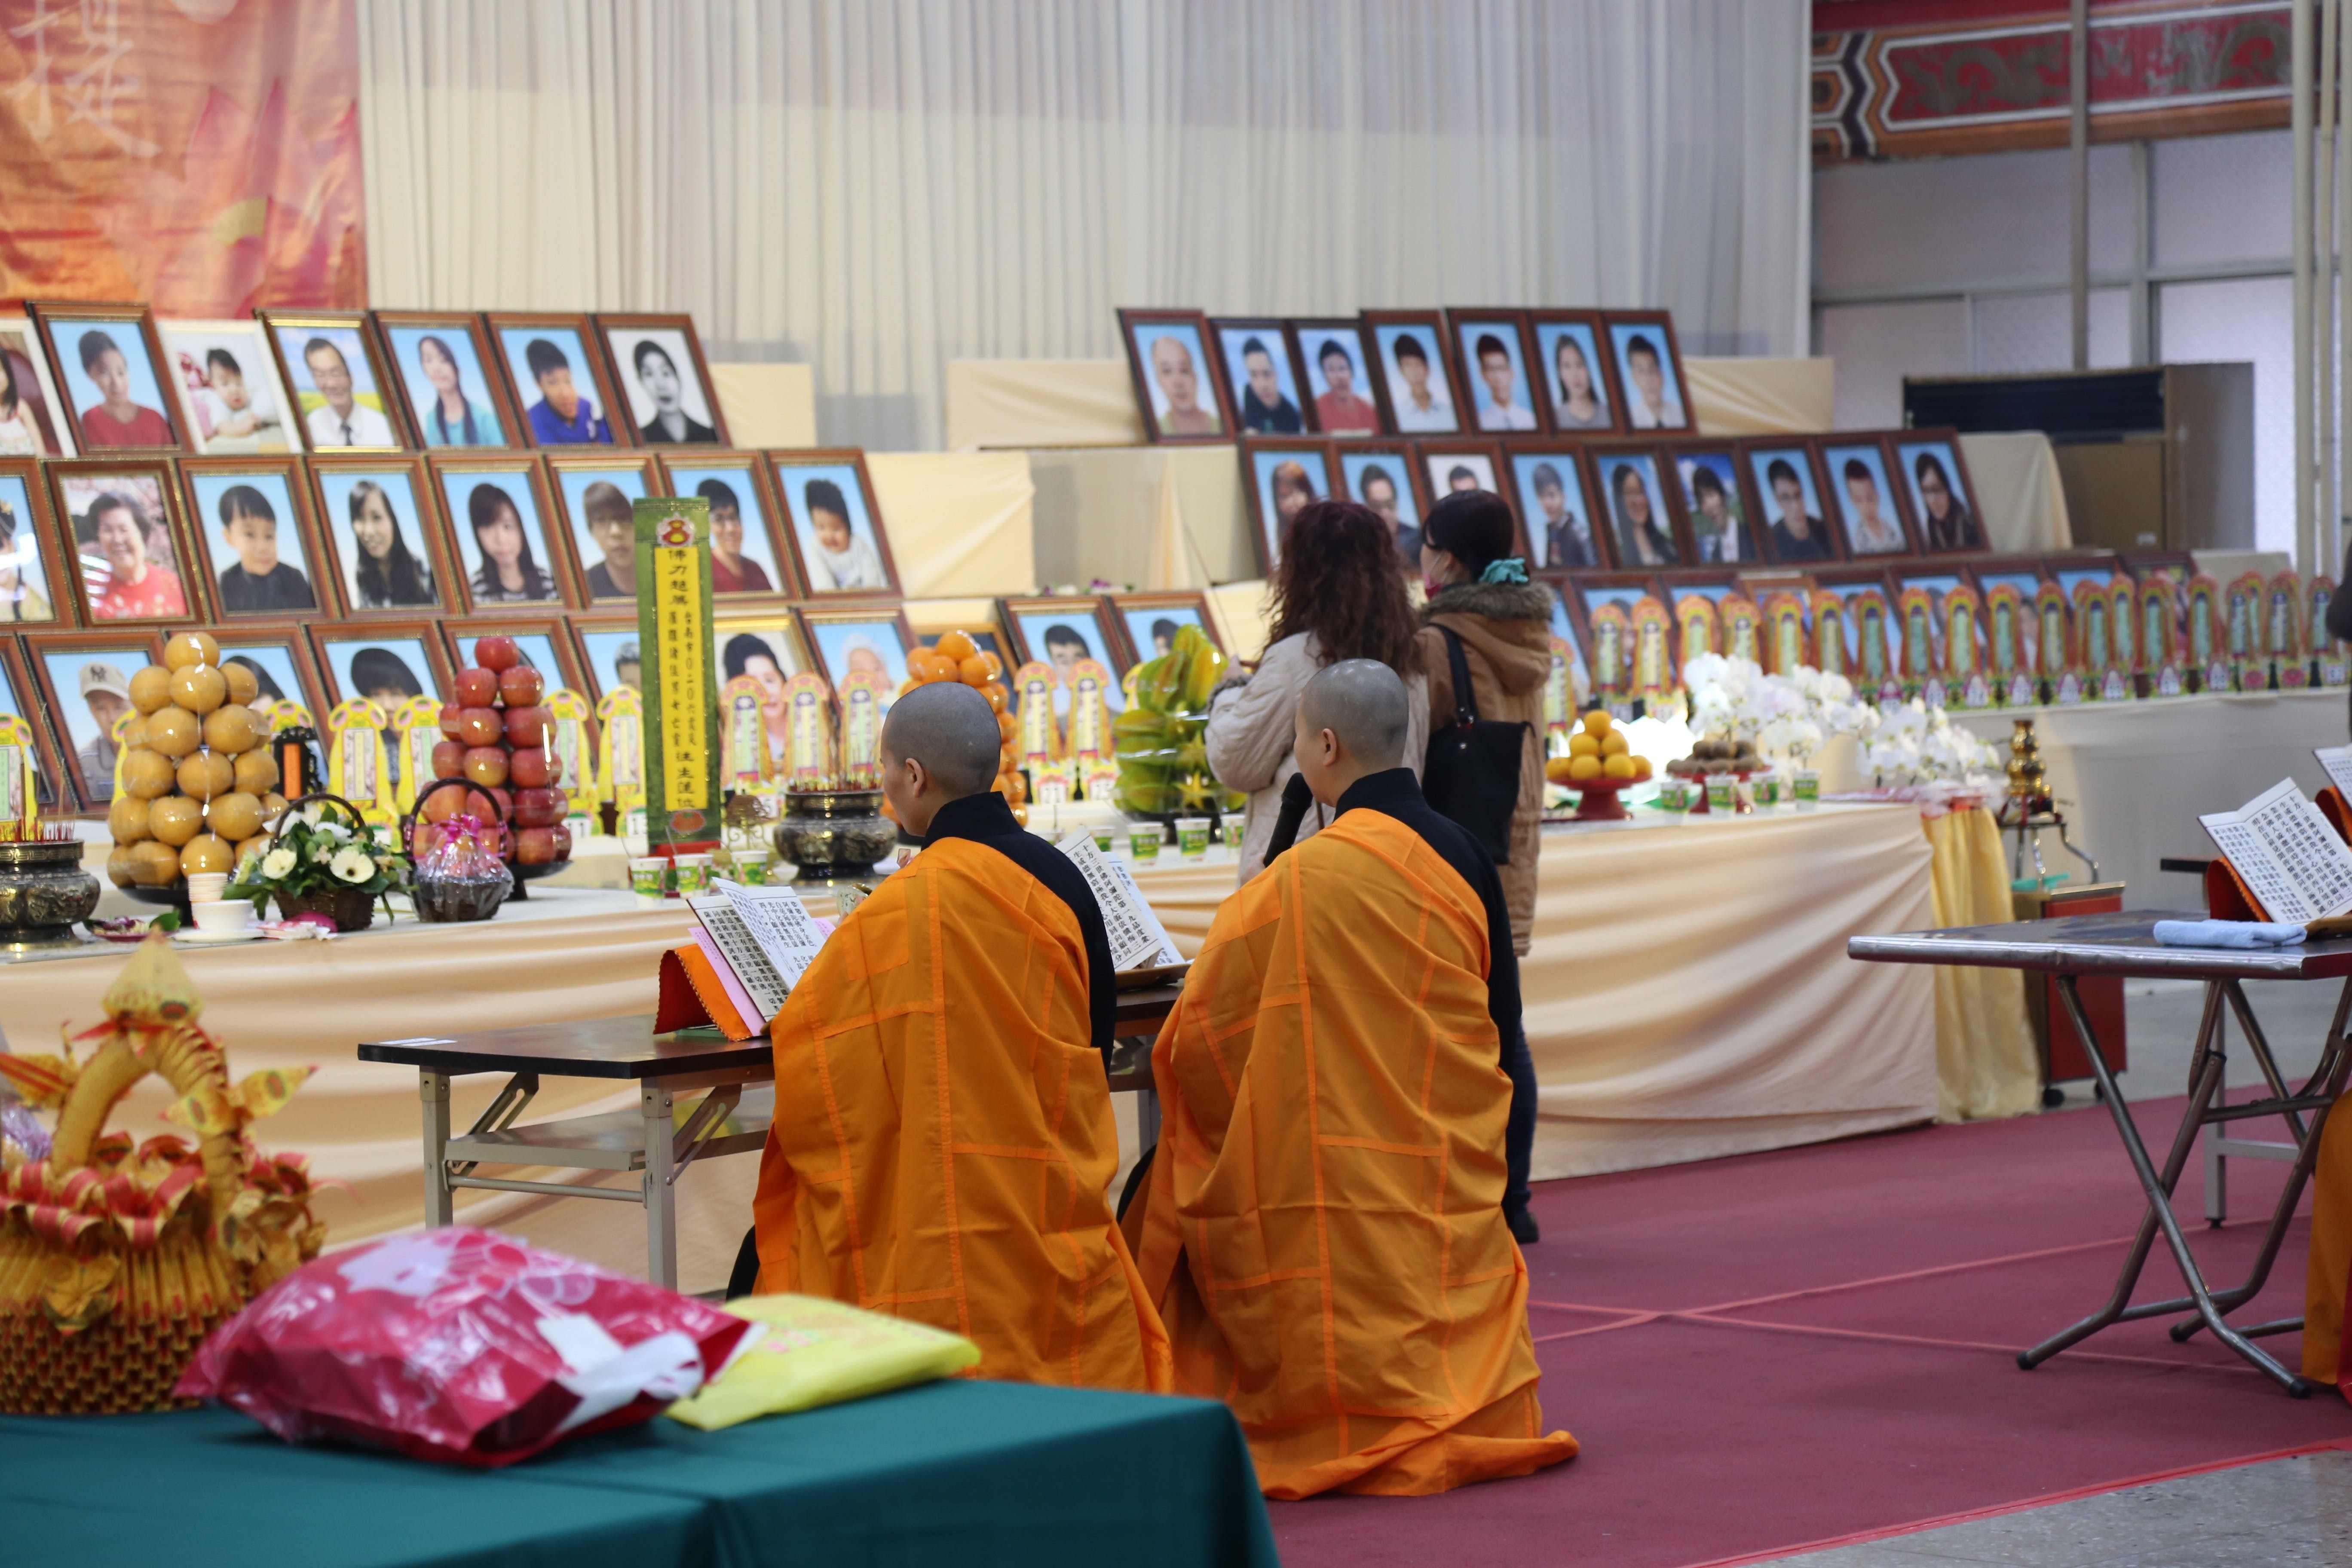 Buddhist monks chanted continuously at the funeral to calm the spirits of the deceased. Photo Credit: Tony Coolidge